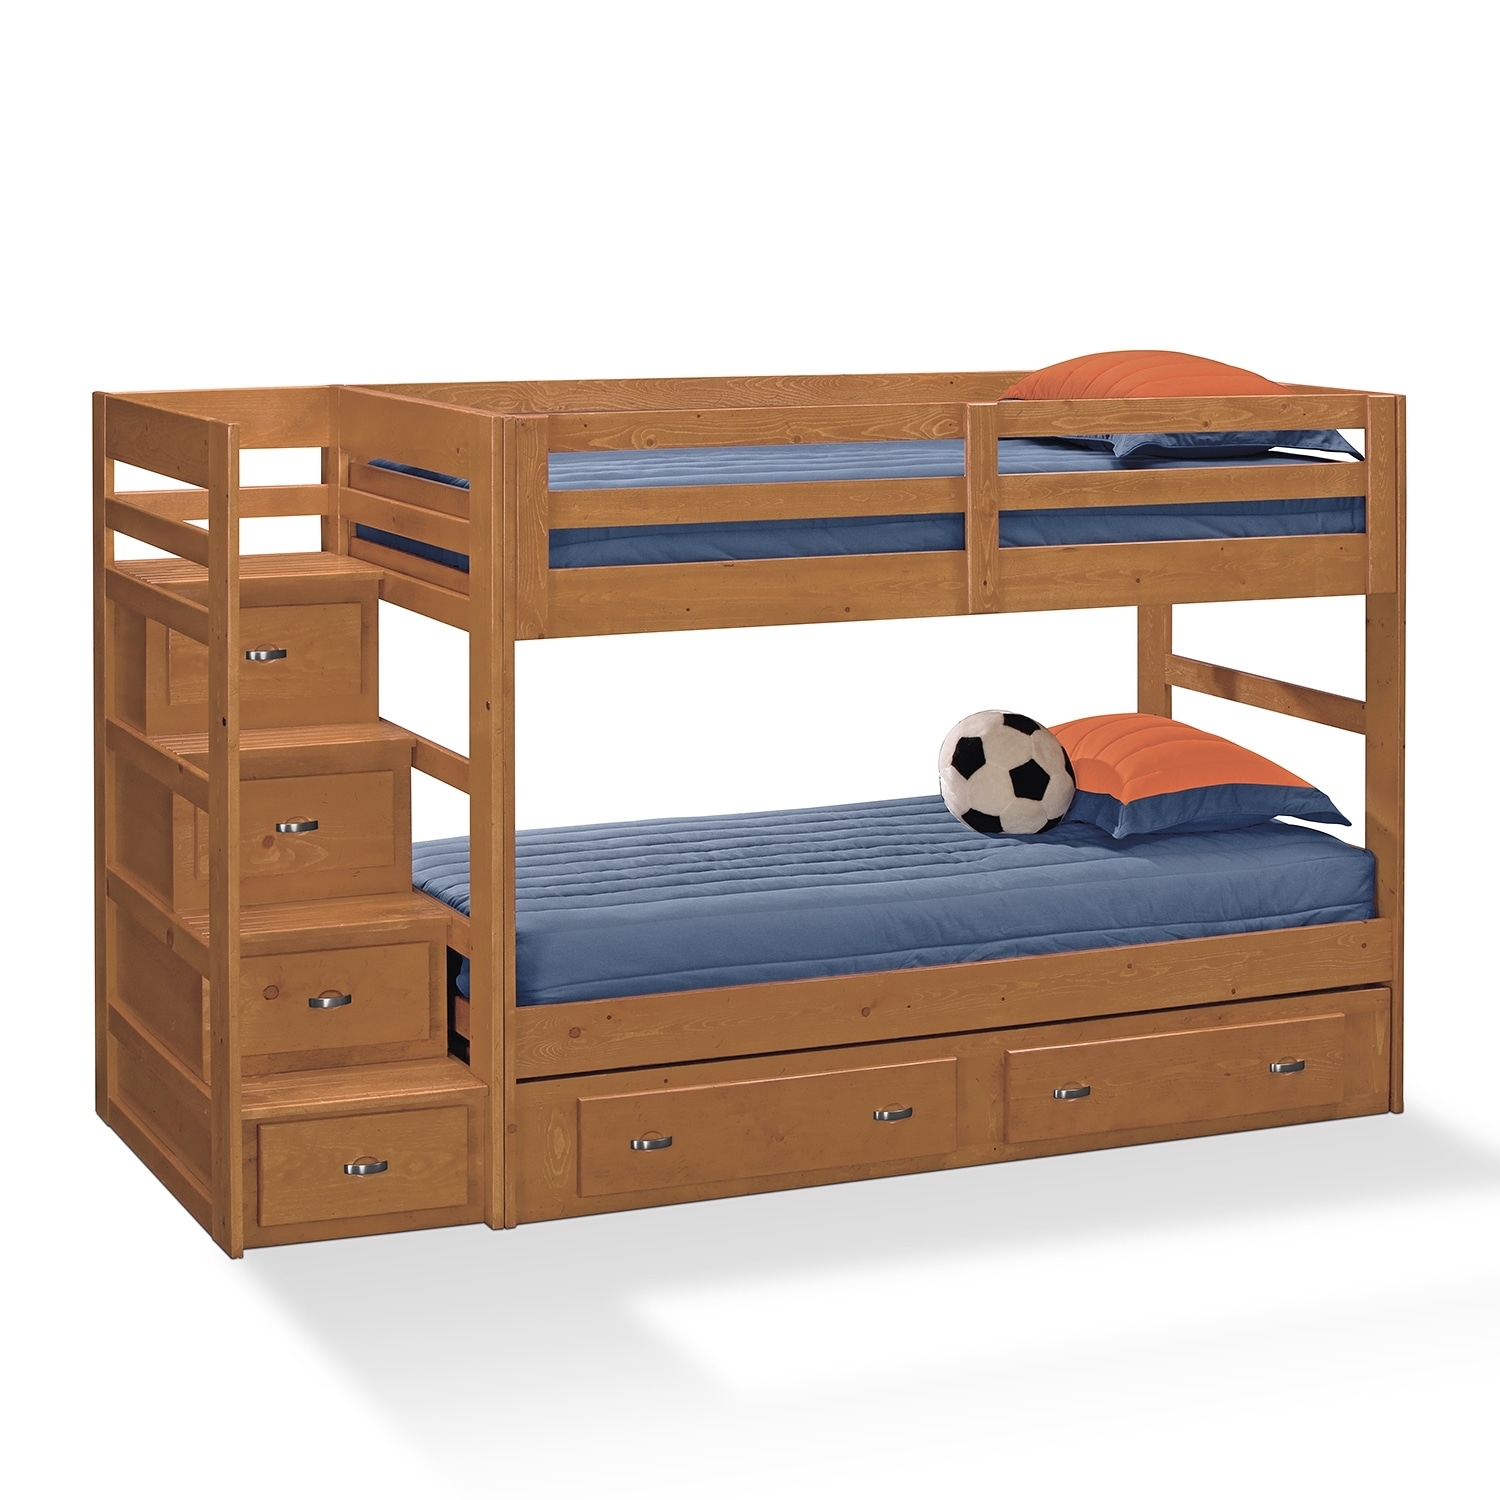 Furniture varsity pine iii twin bunk bed with stairs and